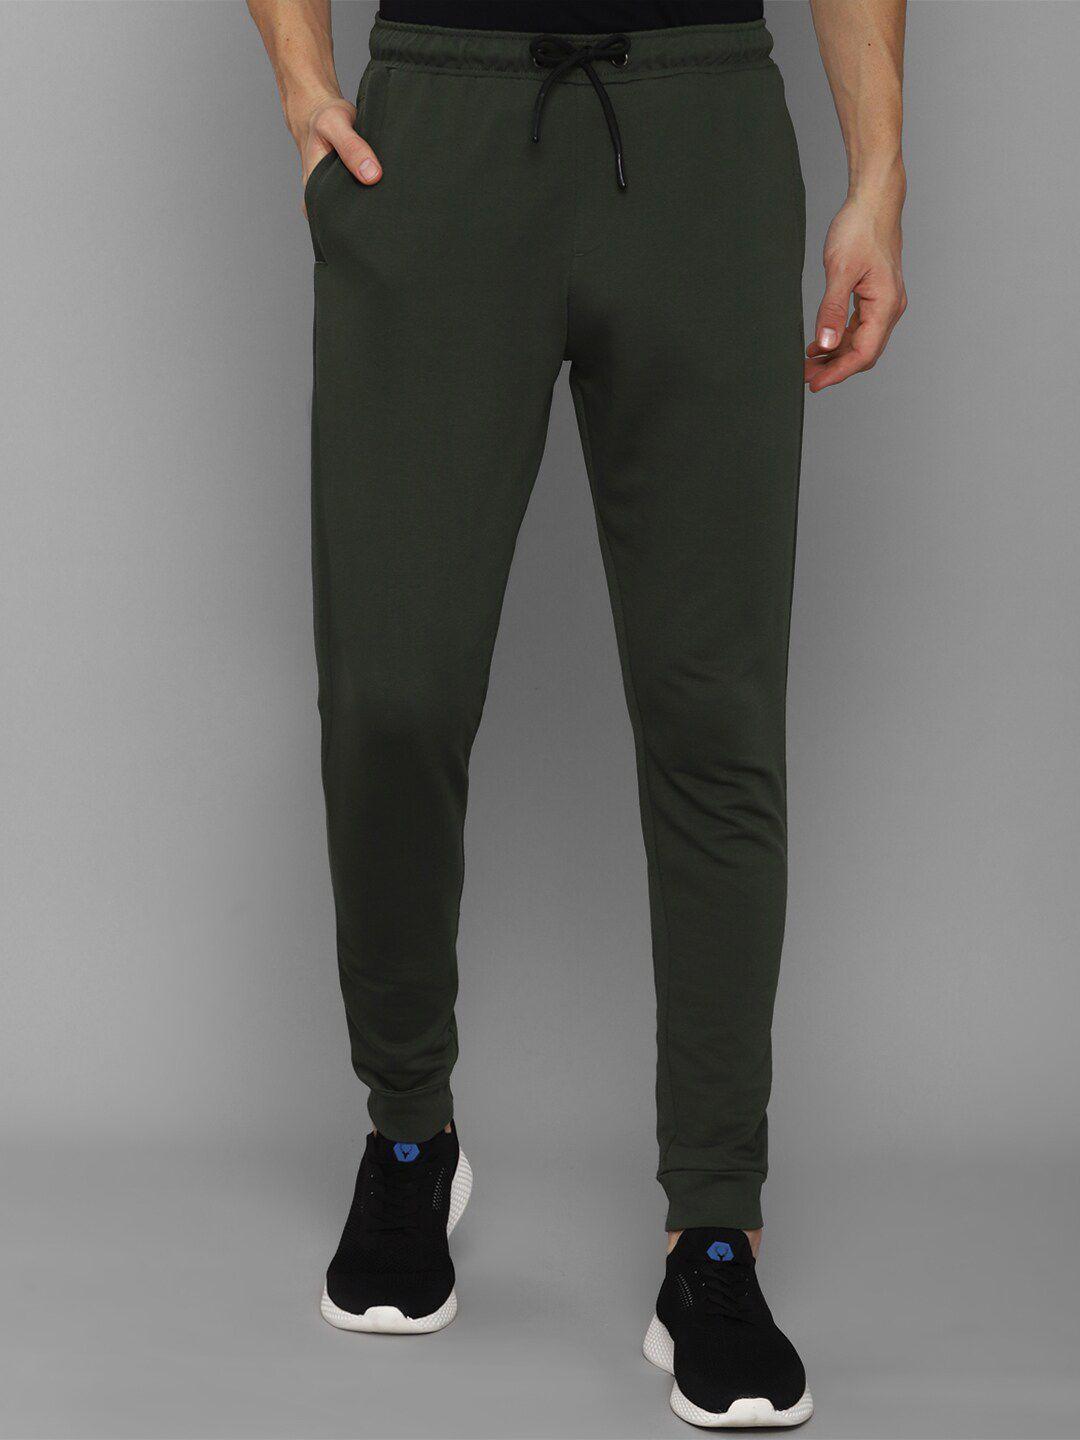 allen-solly-men-olive-solid-cotton-joggers